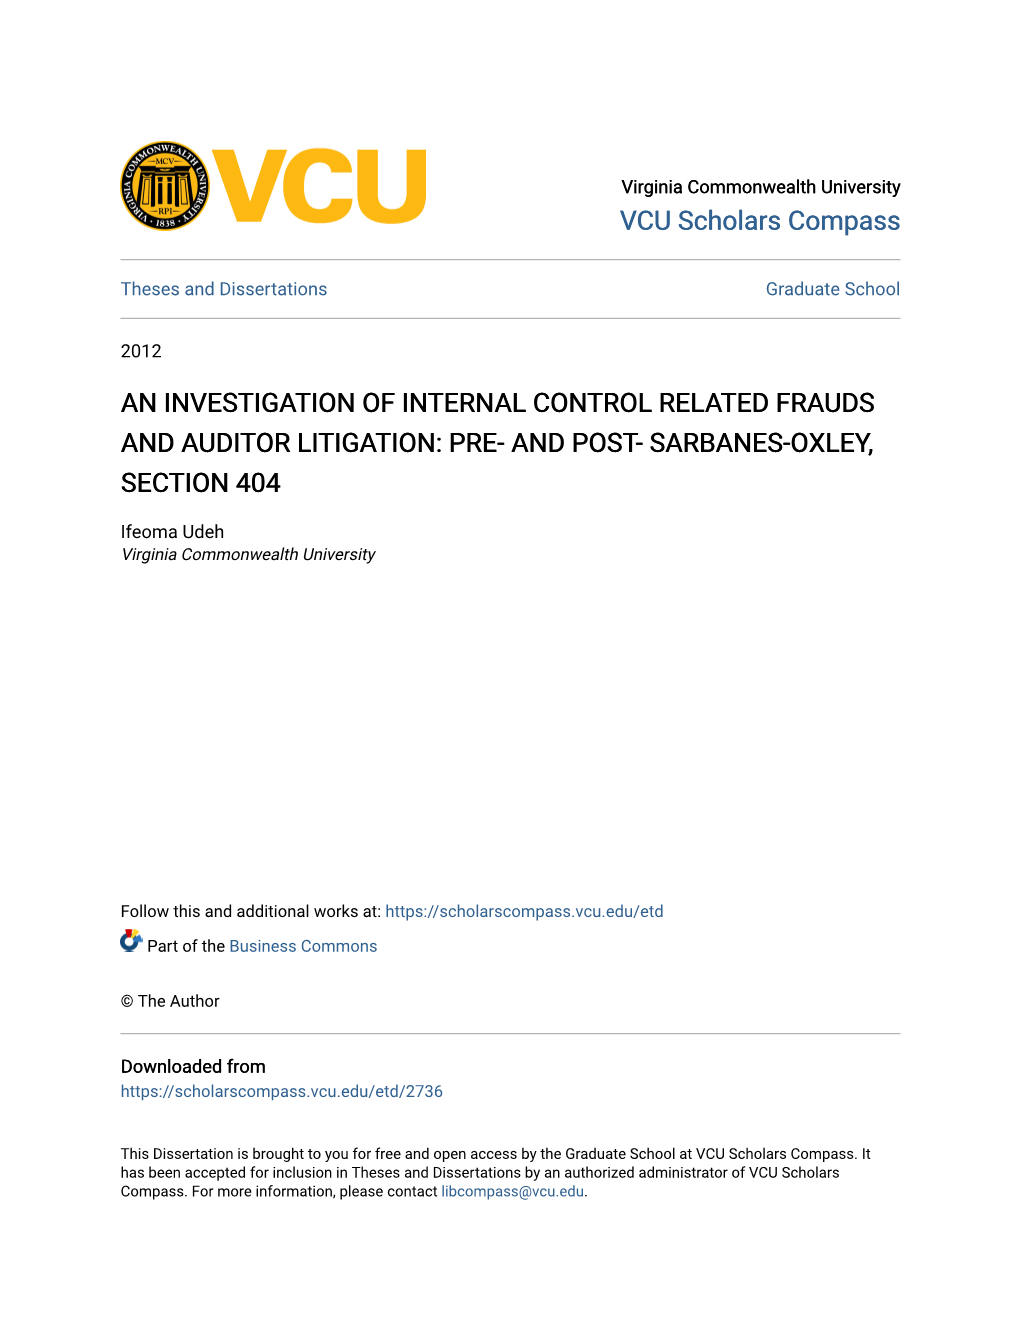 An Investigation of Internal Control Related Frauds and Auditor Litigation: Pre- and Post- Sarbanes-Oxley, Section 404